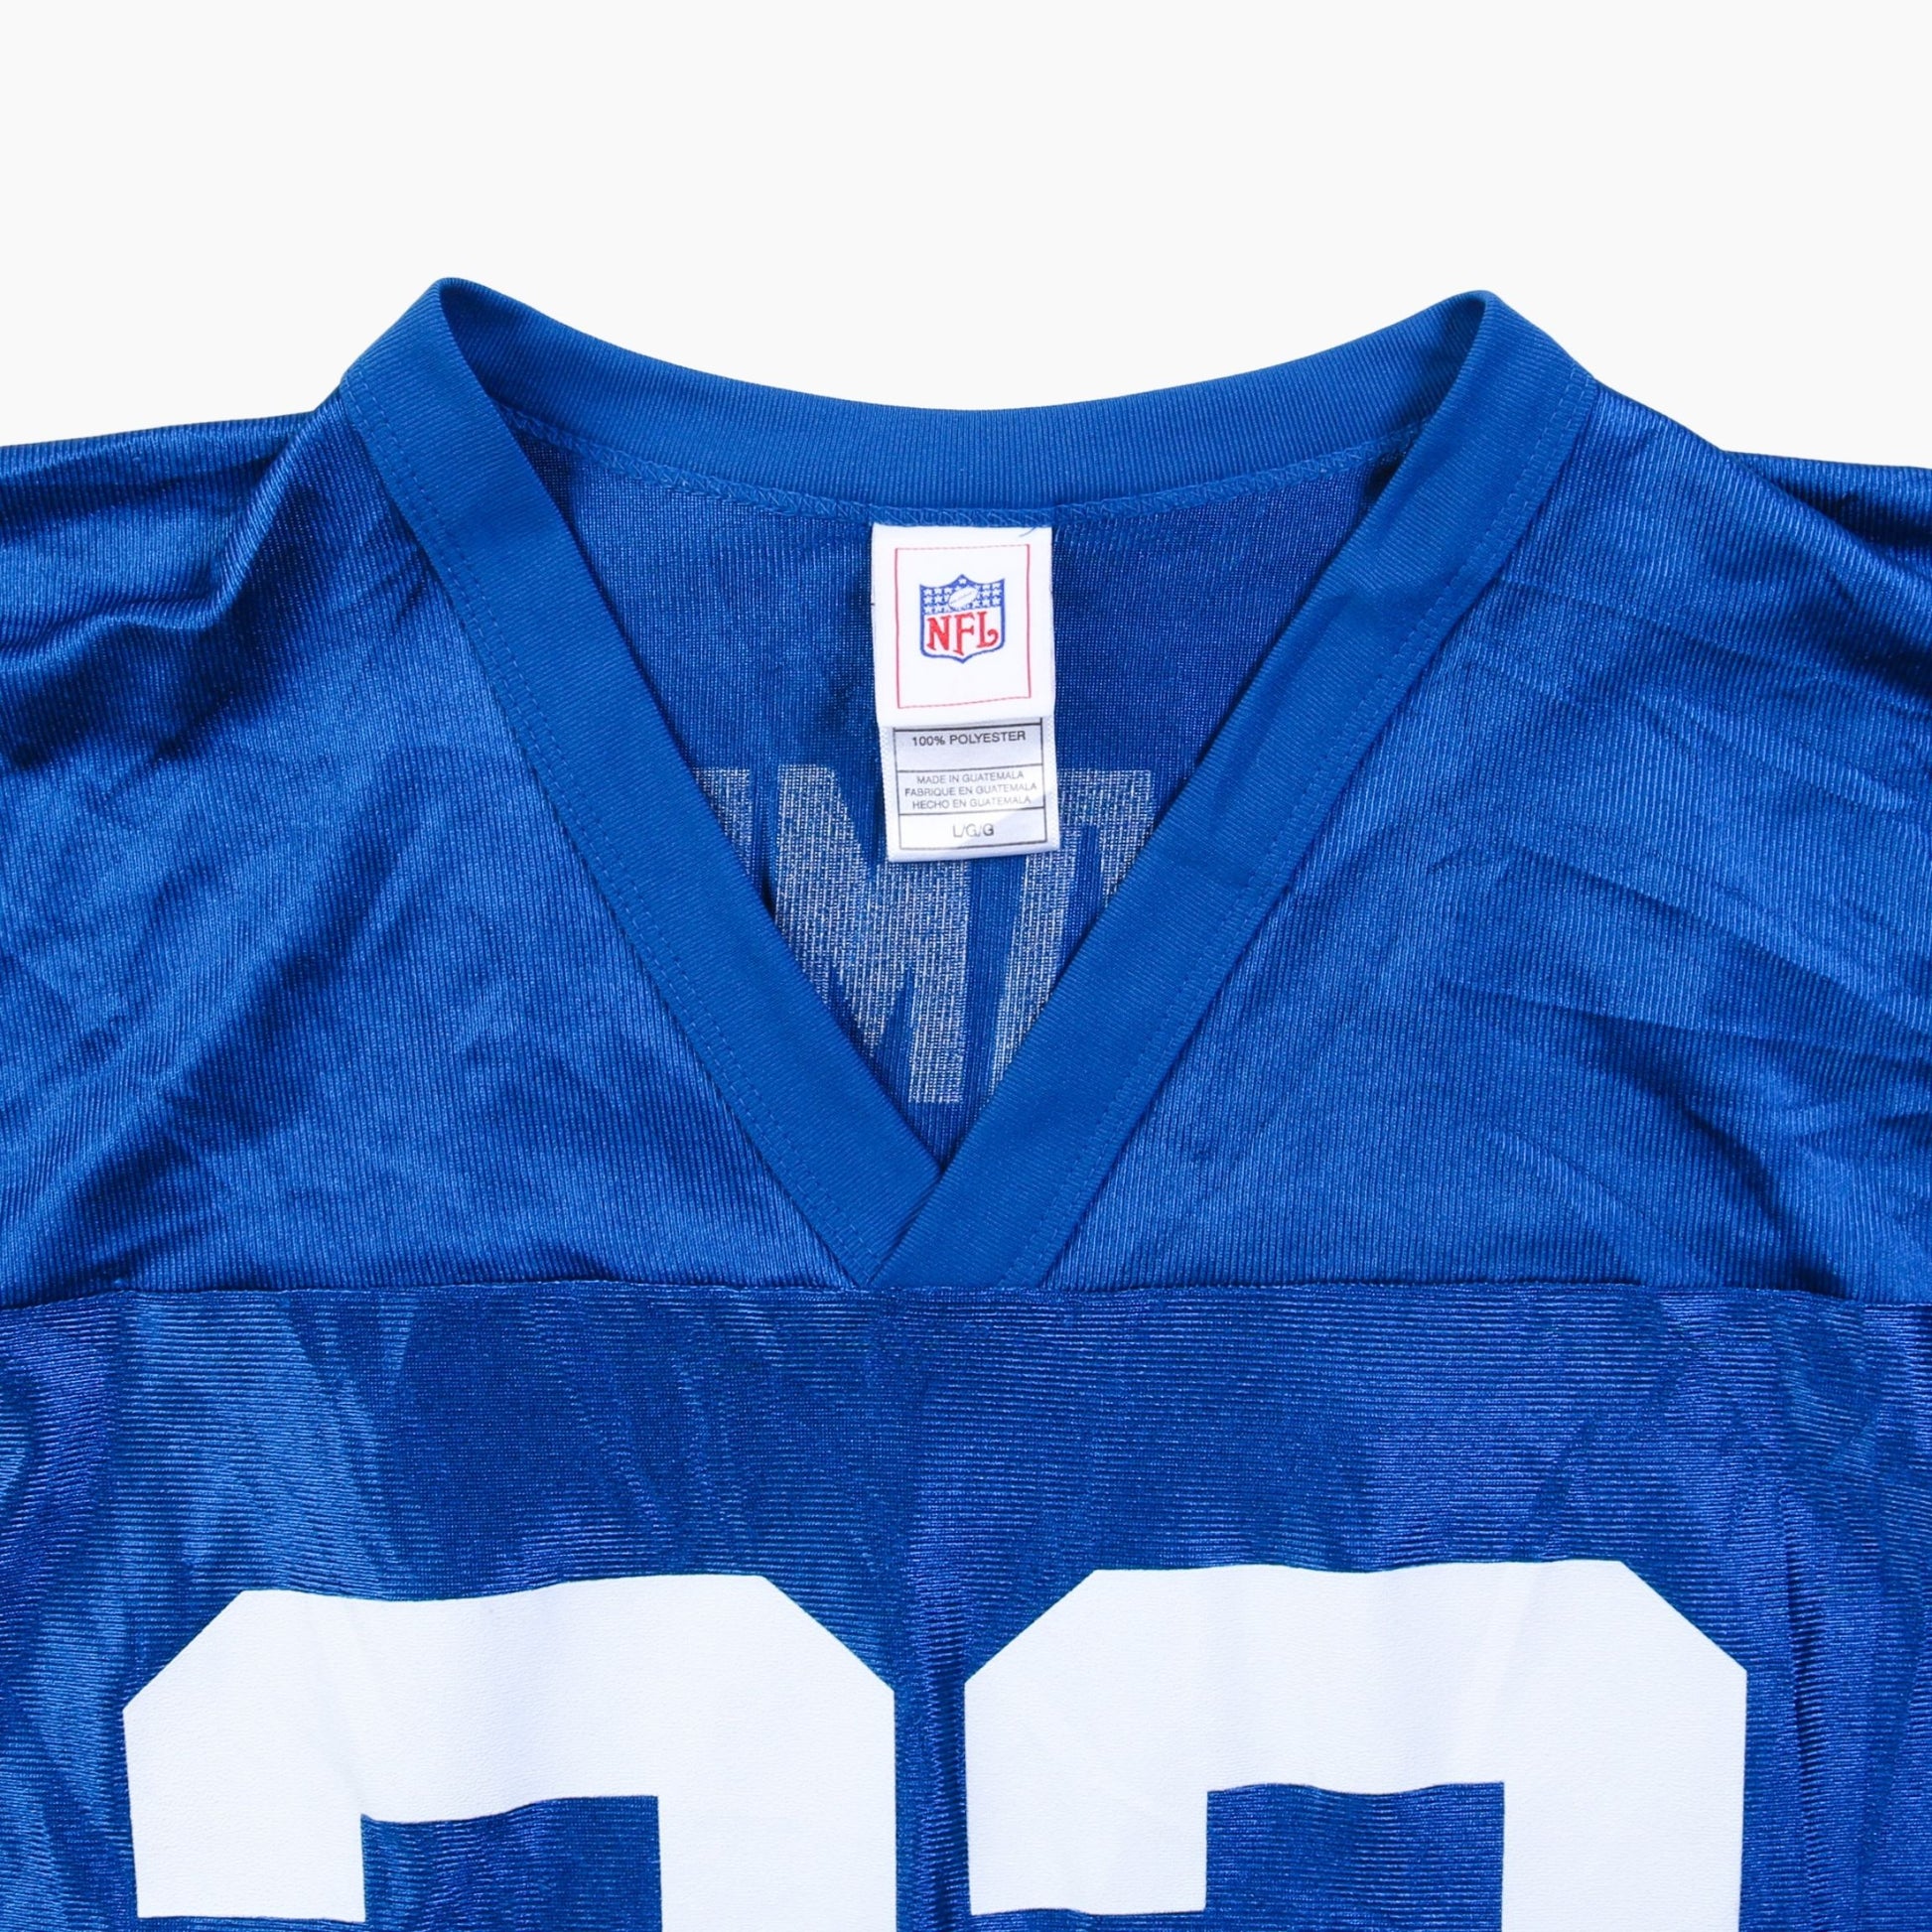 Indianapolis Colts NFL Jersey 'James' - American Madness